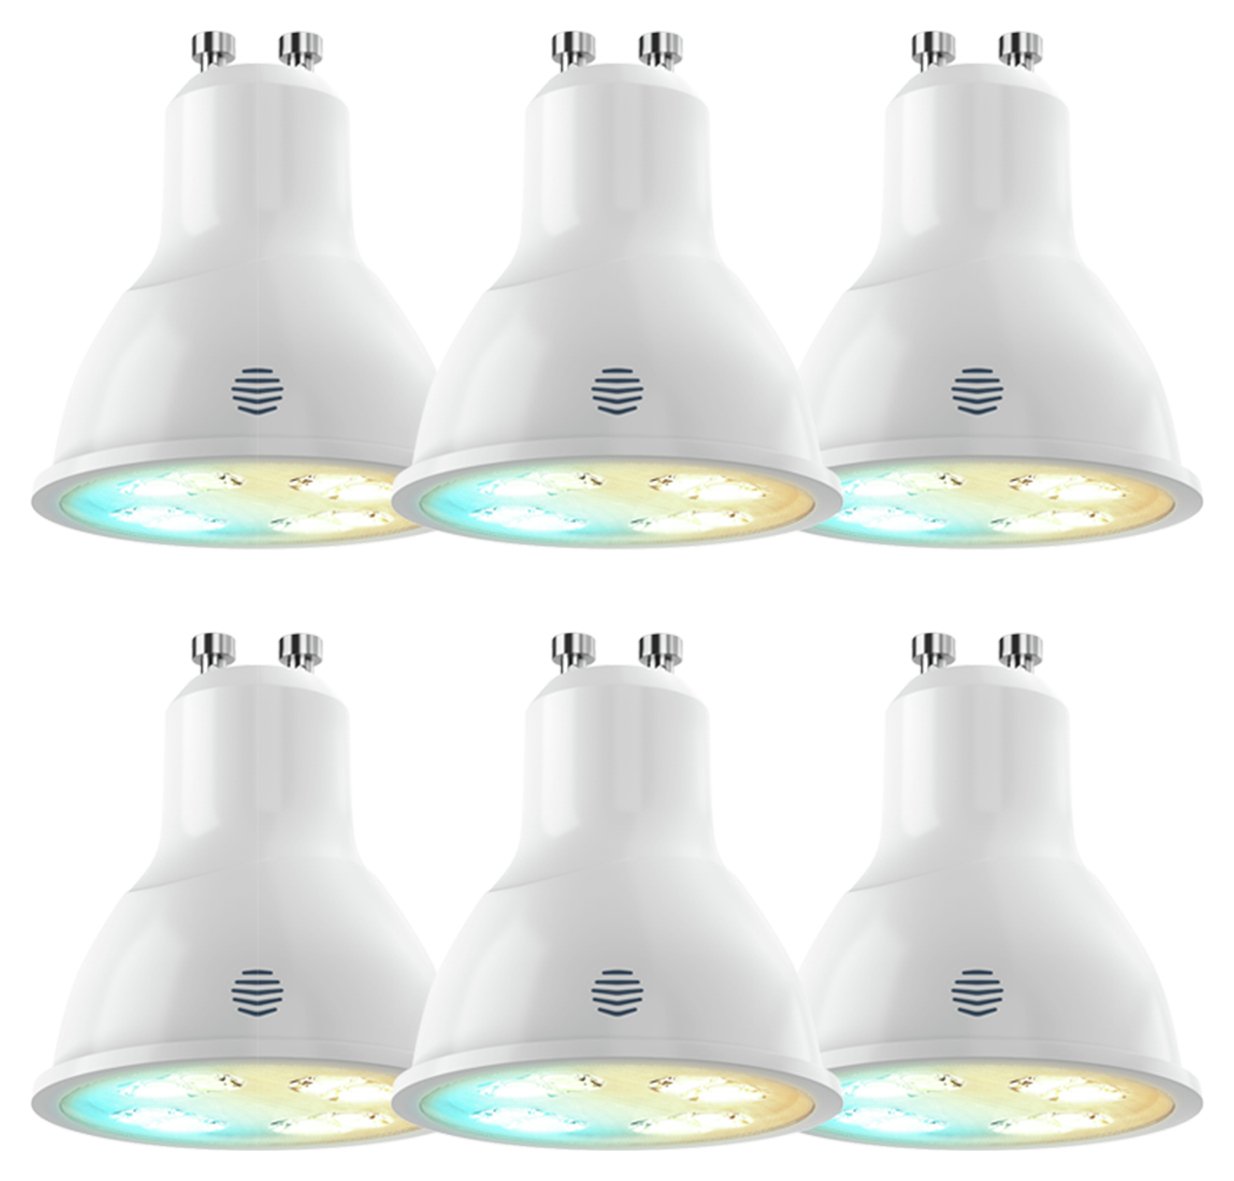 Hive Active Light Tuneable GU10 Bulb - 6 Pack